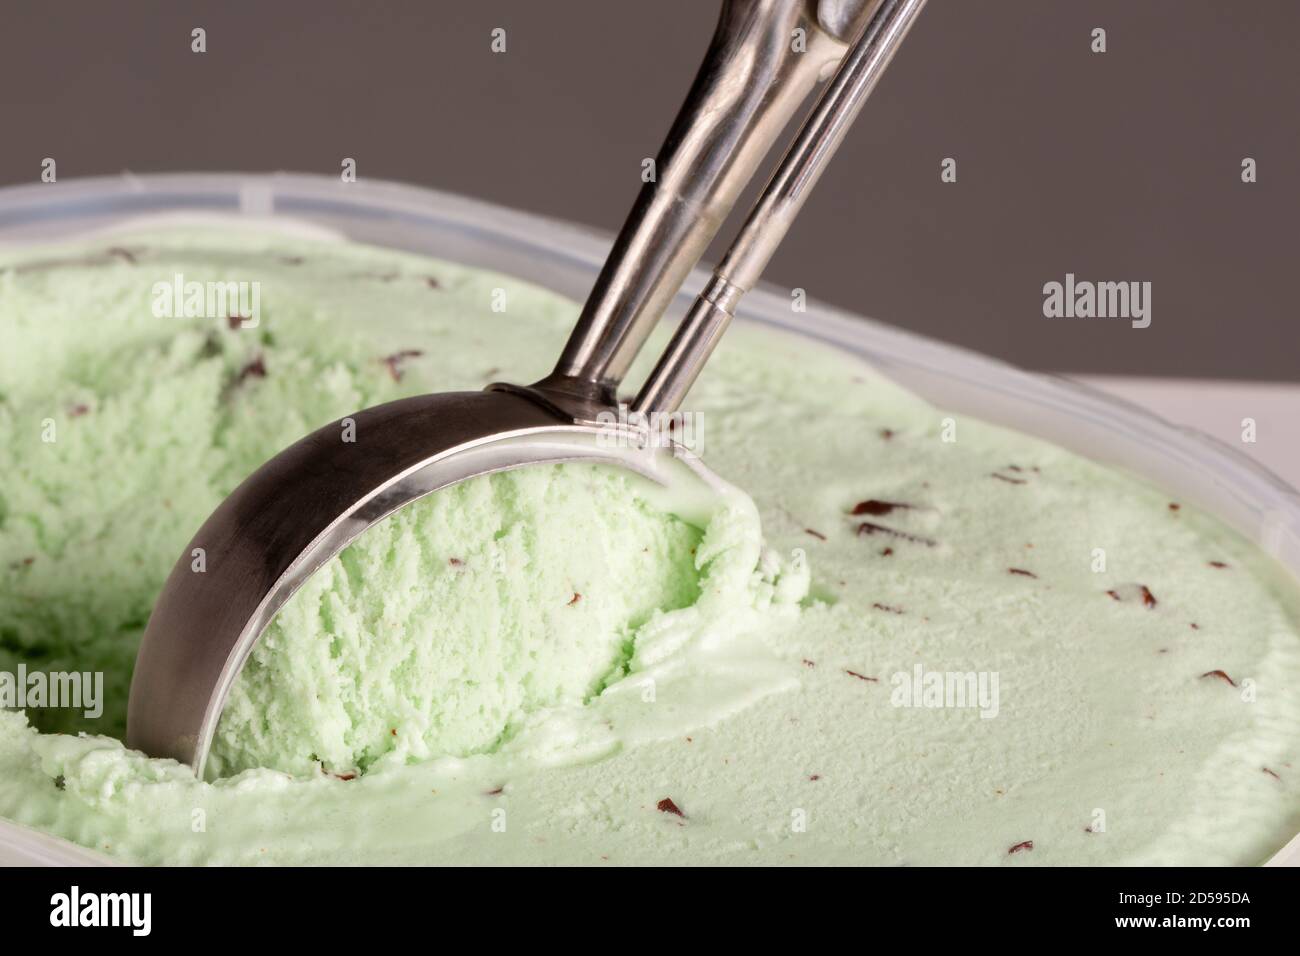 Close up of mint choc chip ice cream being scooped up by a mechanical scoop to be served. Stock Photo